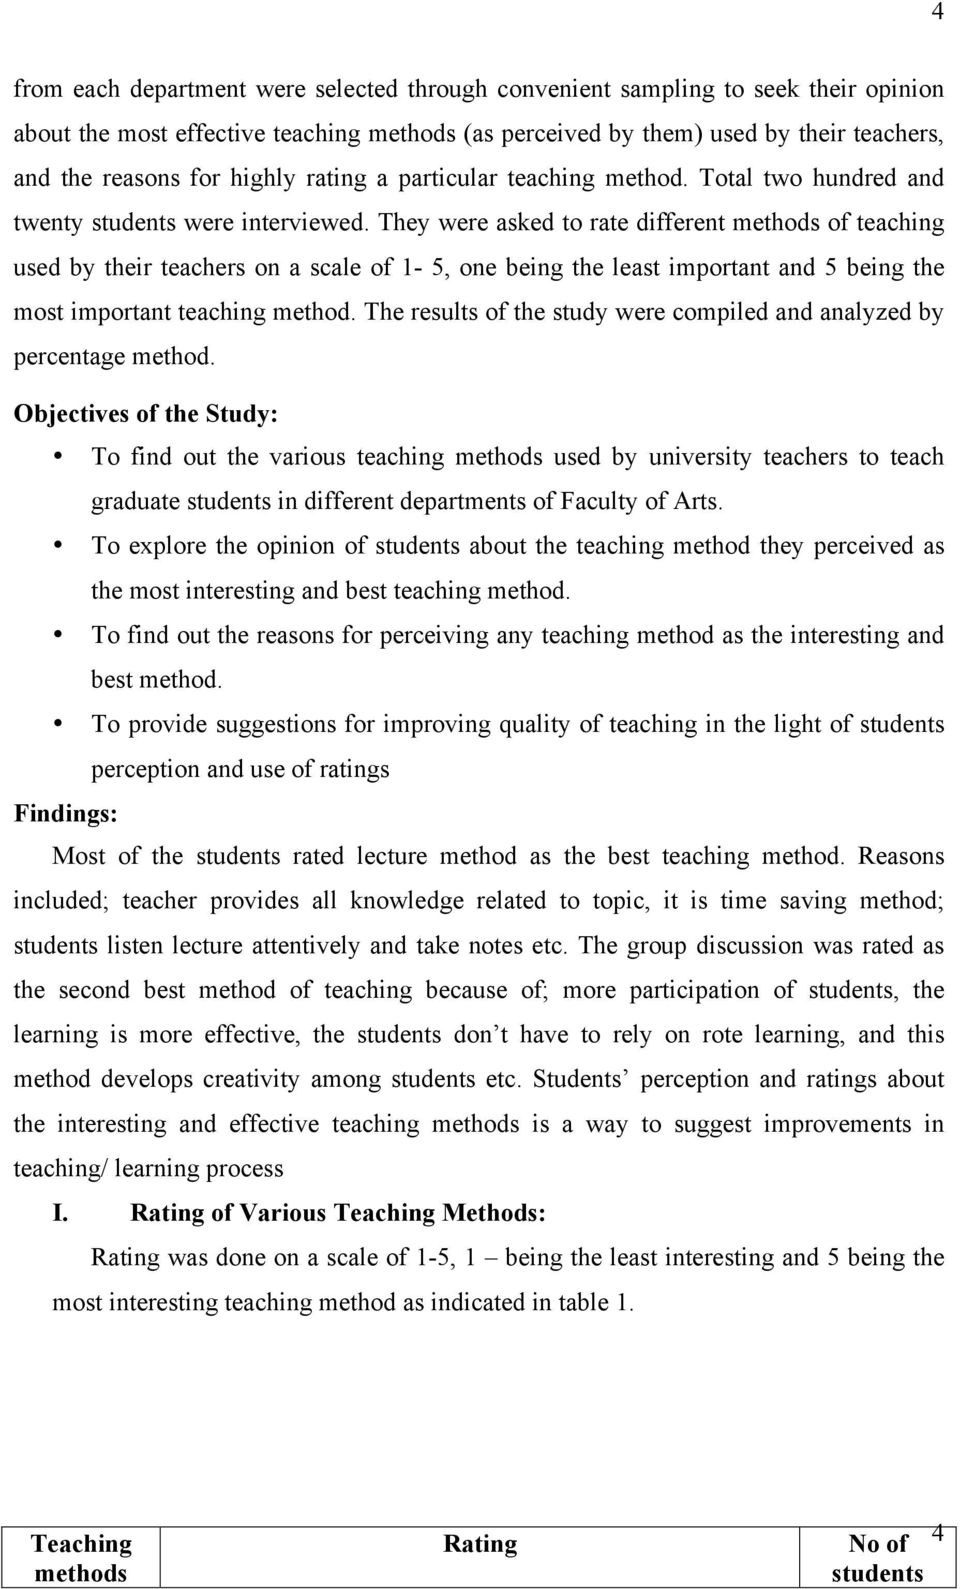 They were asked to rate different methods of teaching used by their teachers on a scale of 1-5, one being the least important and 5 being the most important teaching method.